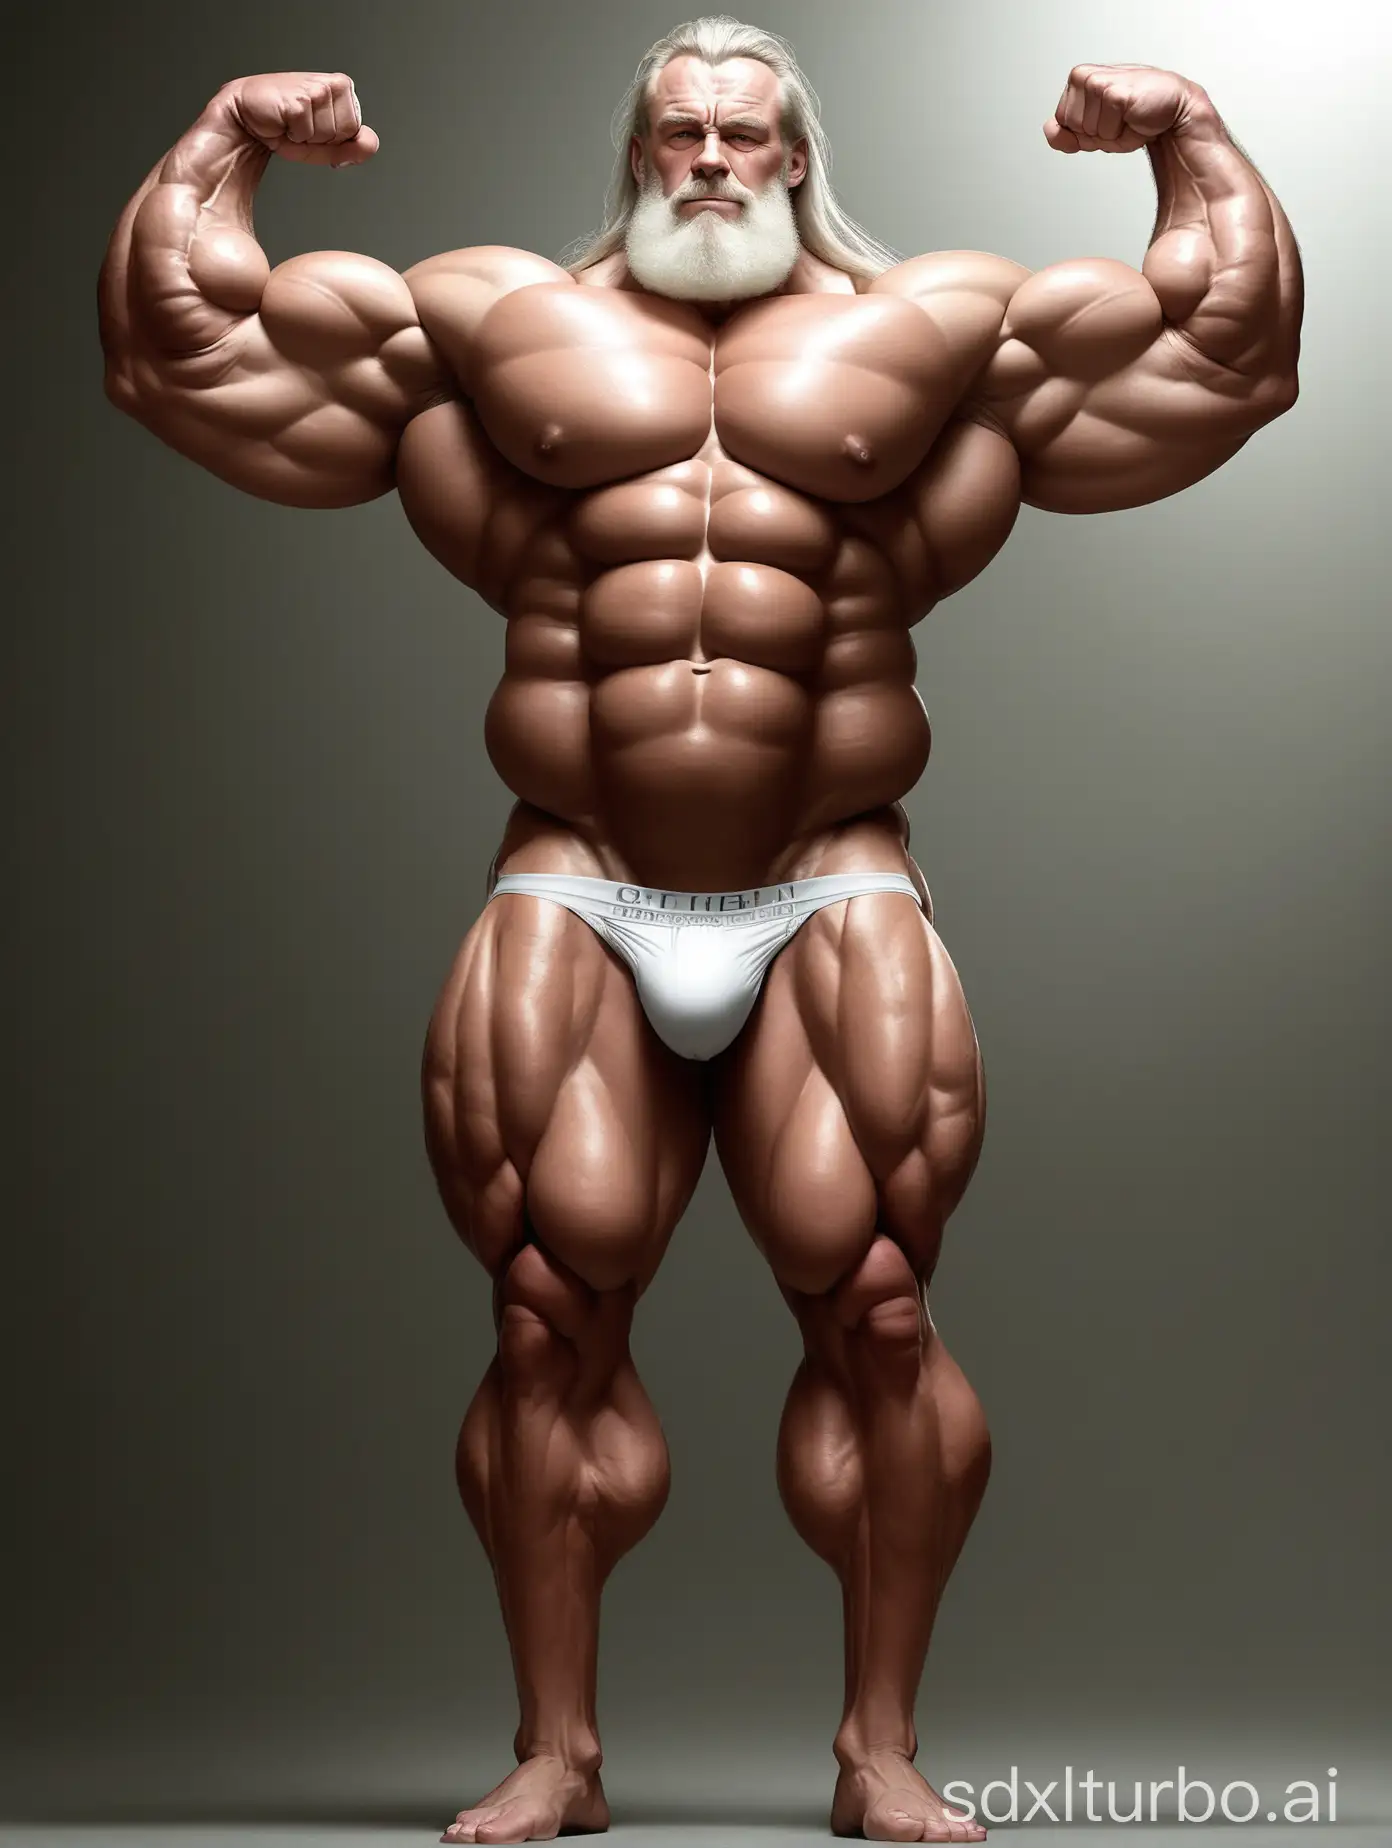 White skin and massive muscle stud, Huge and giant and Strong body, Very strong legs, 2m tall, very Big Chest, very Big biceps, very 8-pack abs, Very Massive muscle Body, Wearing underwear, he is very tall, very fat, Full Body, very long strong legs, raises his arms to show his huge biceps, raises his arms to show his huge biceps, very old man, very handsome men, long hair,